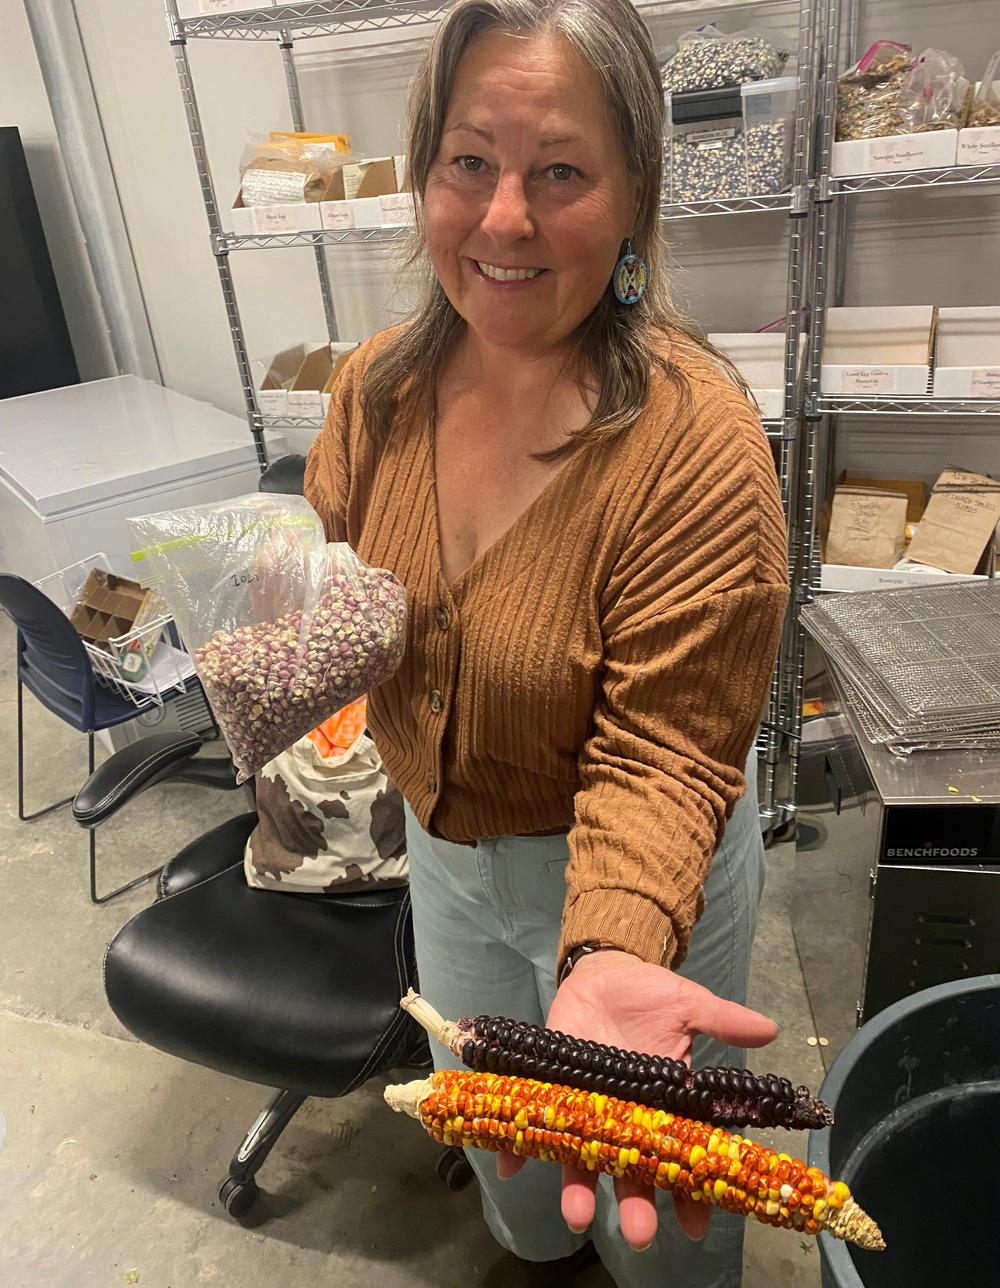 Jill Falcon Ramaker, director of the Buffalo Nations Food Systems Initiative at Montana State University, holds corn grown from the seed of ancient varieties once raised by the Mandan, Hidatsa, and Arikara peoples along the Missouri River in North Dakota. With her right hand, she holds a bag of Mandan Red Clay corn. In her left is an ear each of Mandan Society and Hopi Black corn varieties.